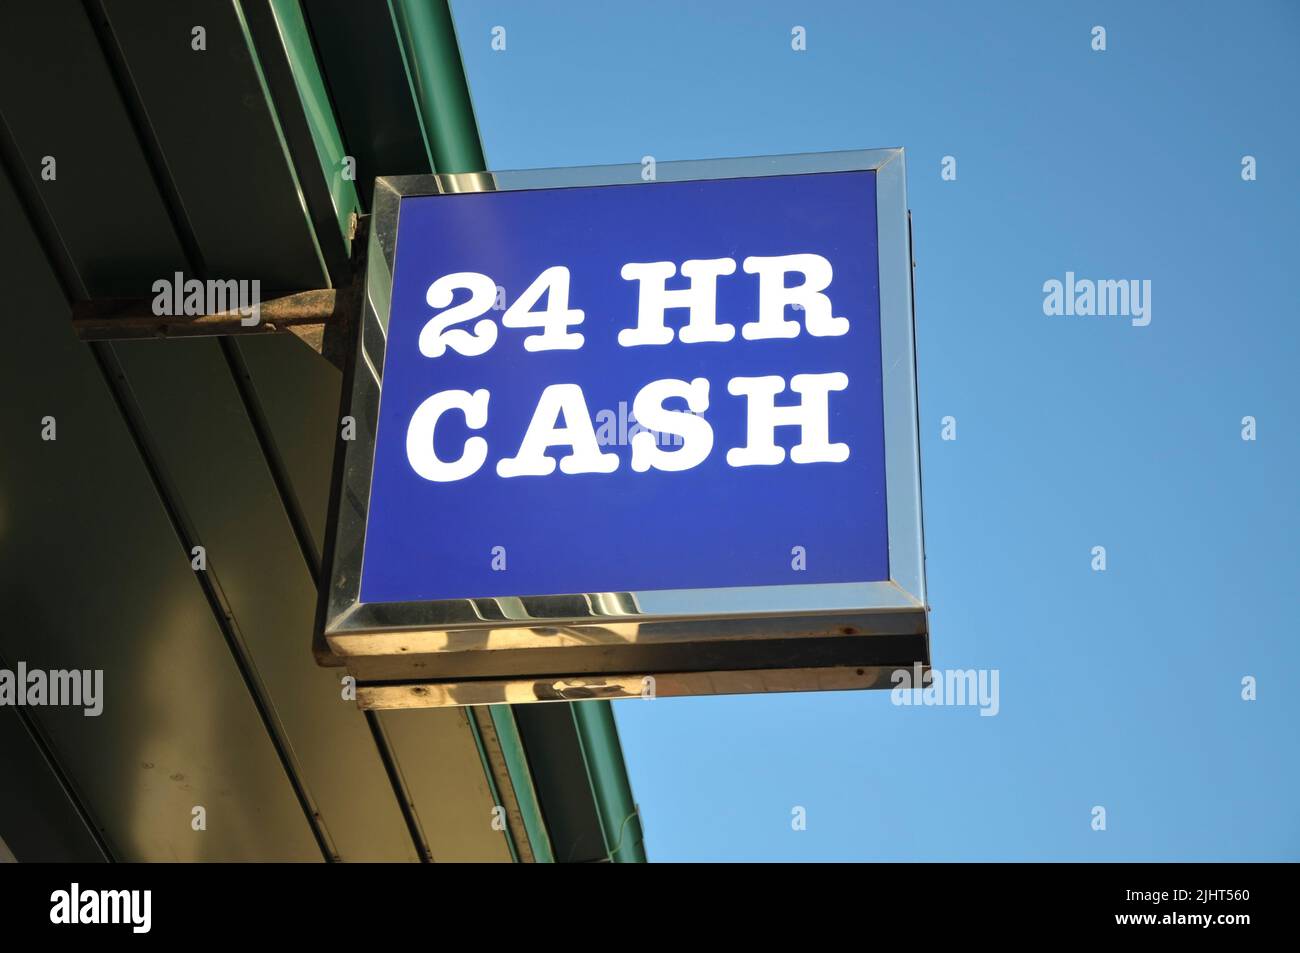 Low angle view of ATM - 24 HR CASH sign attached to building against a clear blue sky. Stock Photo